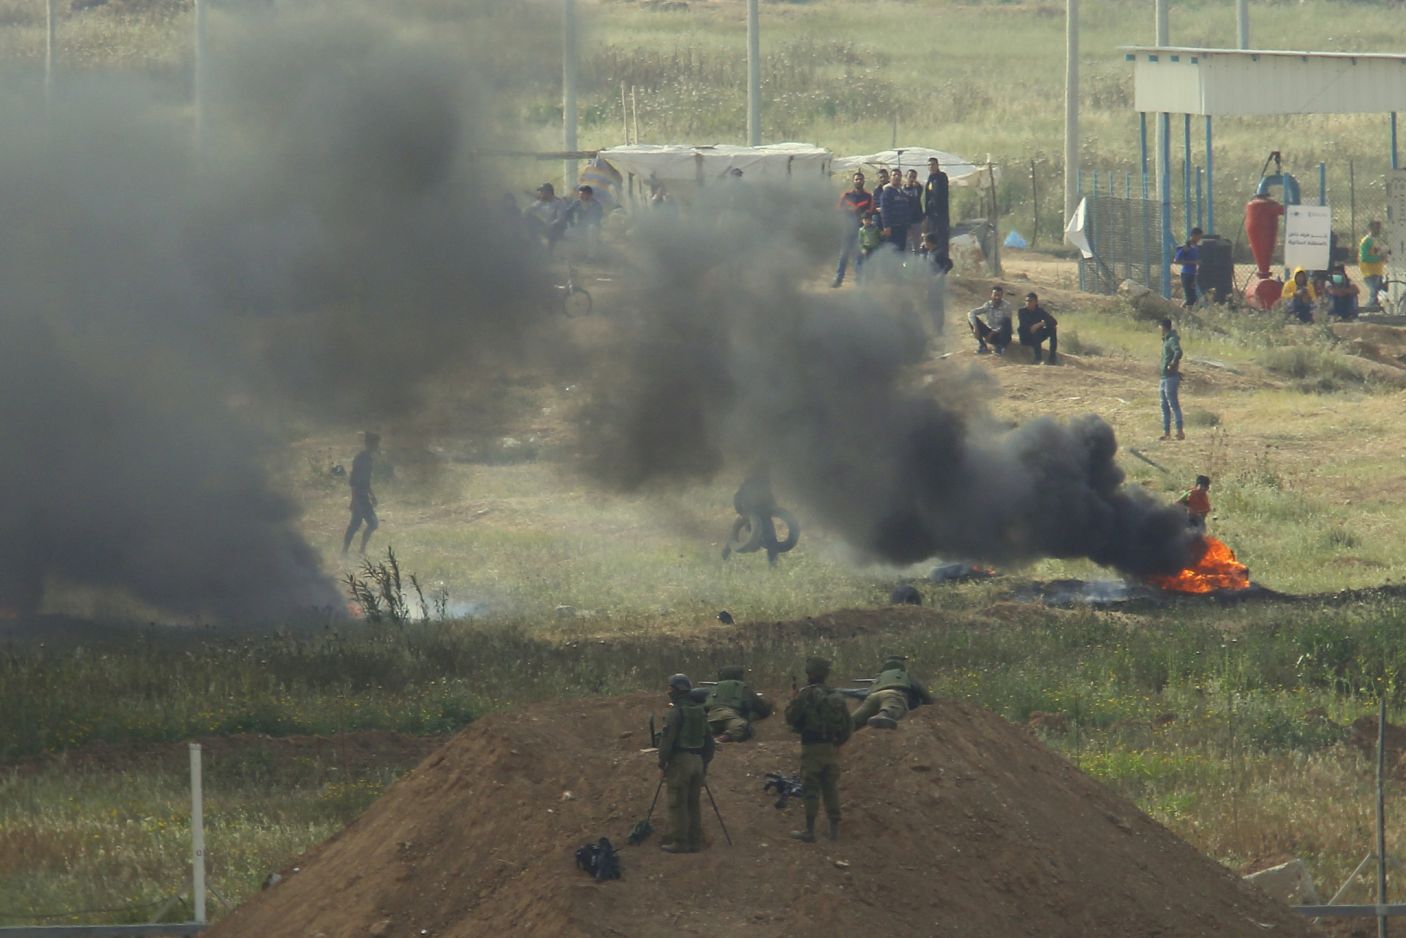 Israeli snipers shooting Palestinian protesters during demonstrations along the border between the occupied lands and besieged Gaza enclave.